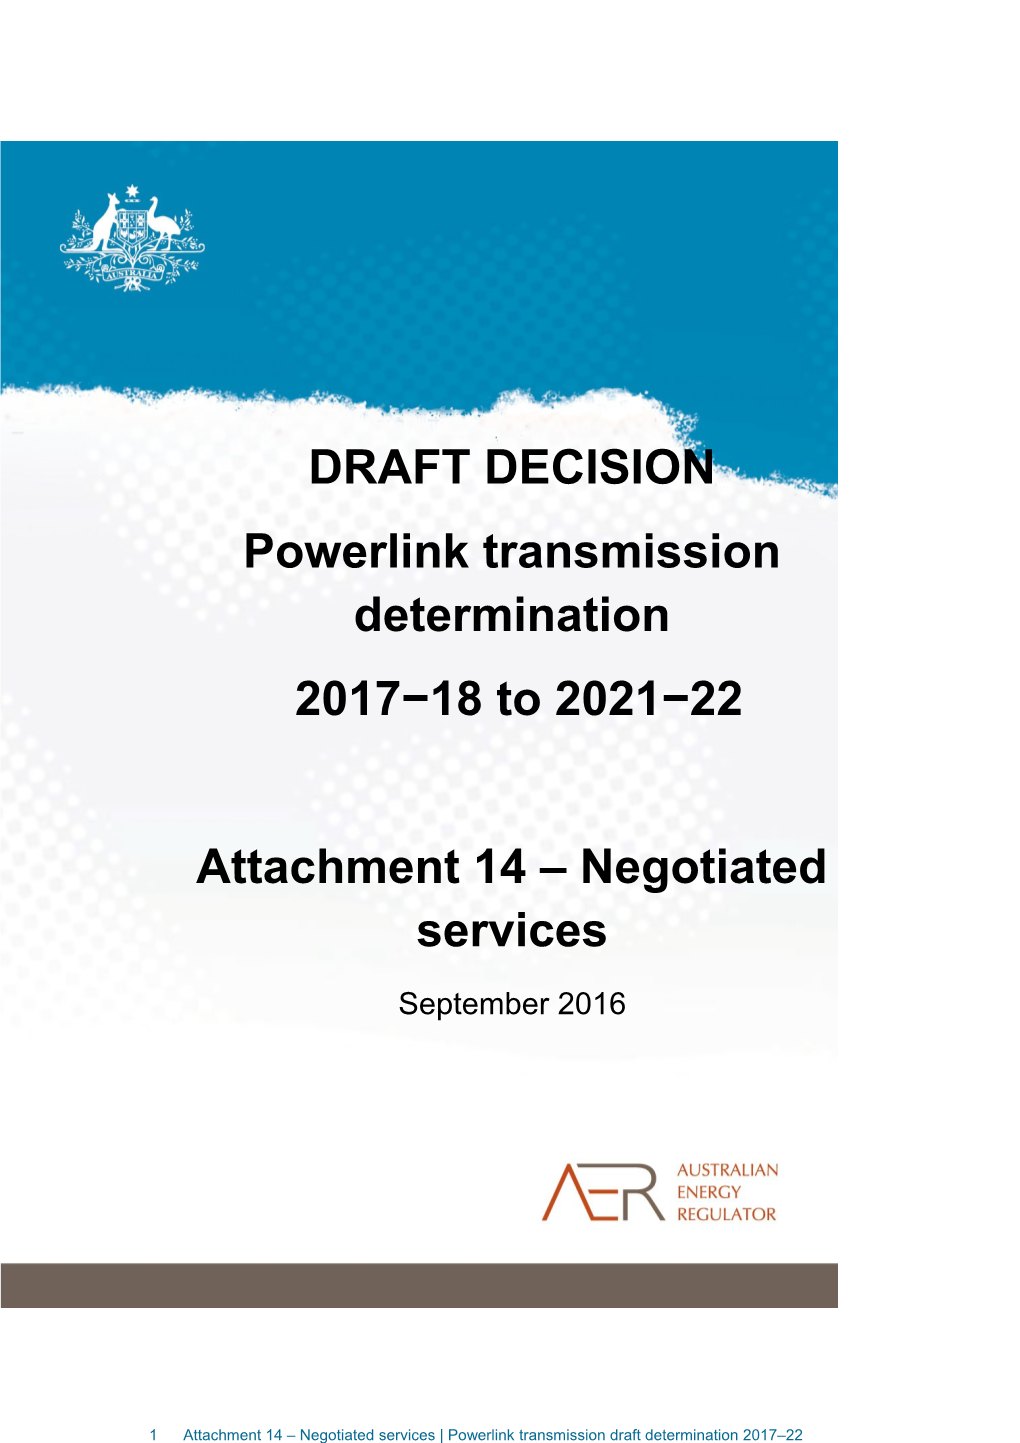 AER Draft Decision - Powerlink - Attachment 14 - Negotiated Services